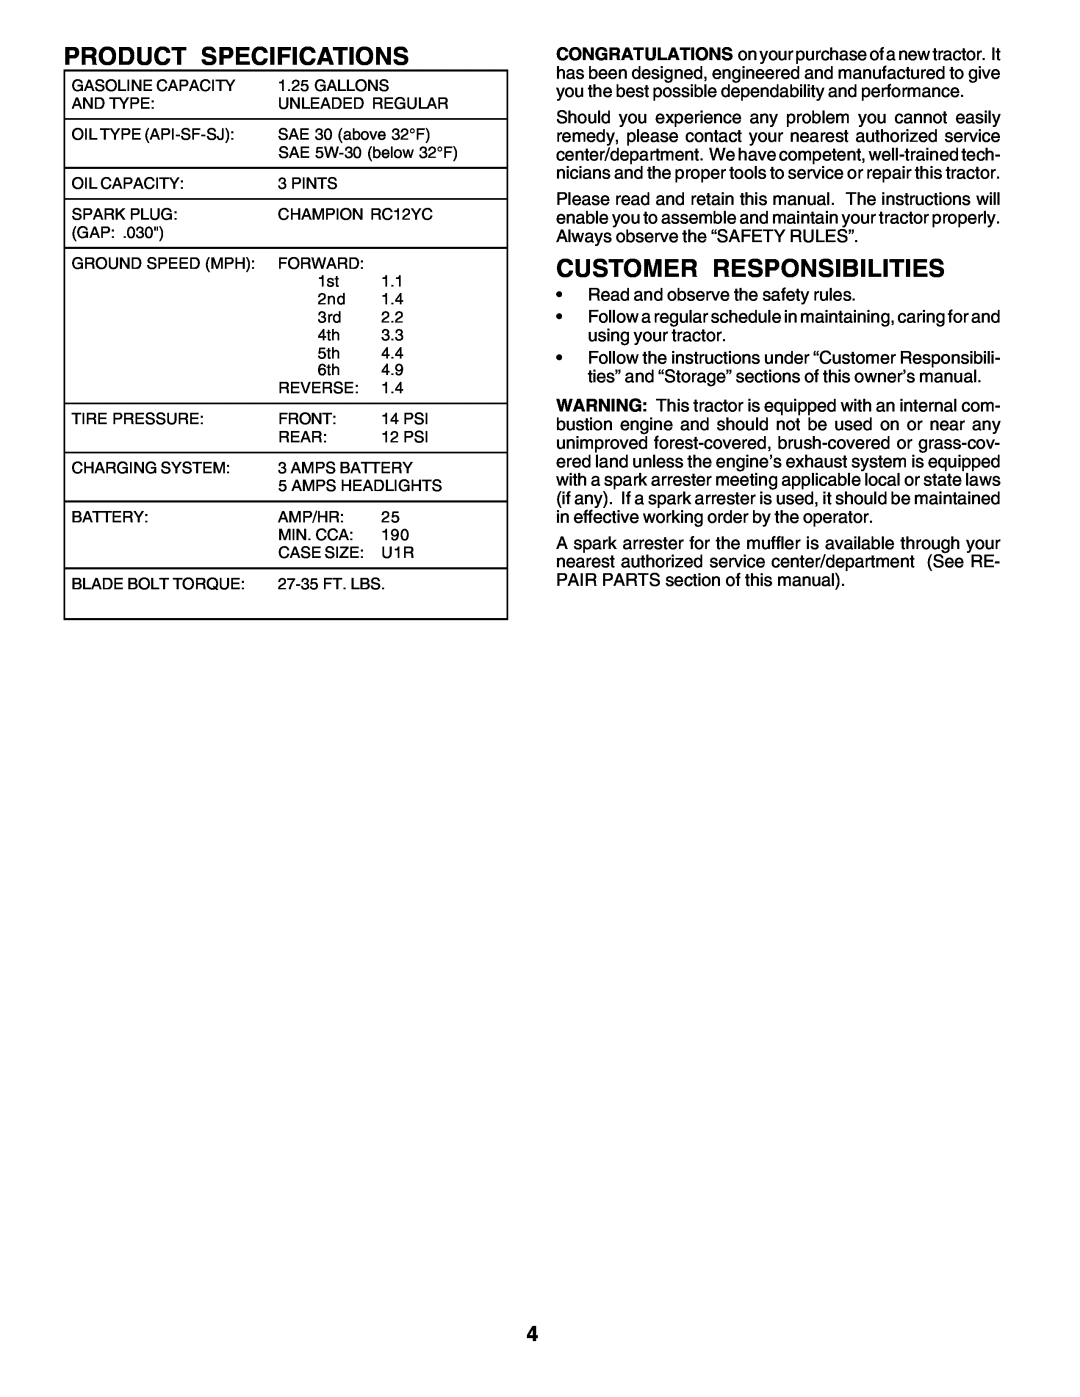 Poulan PC14542D owner manual Product Specifications, Customer Responsibilities 